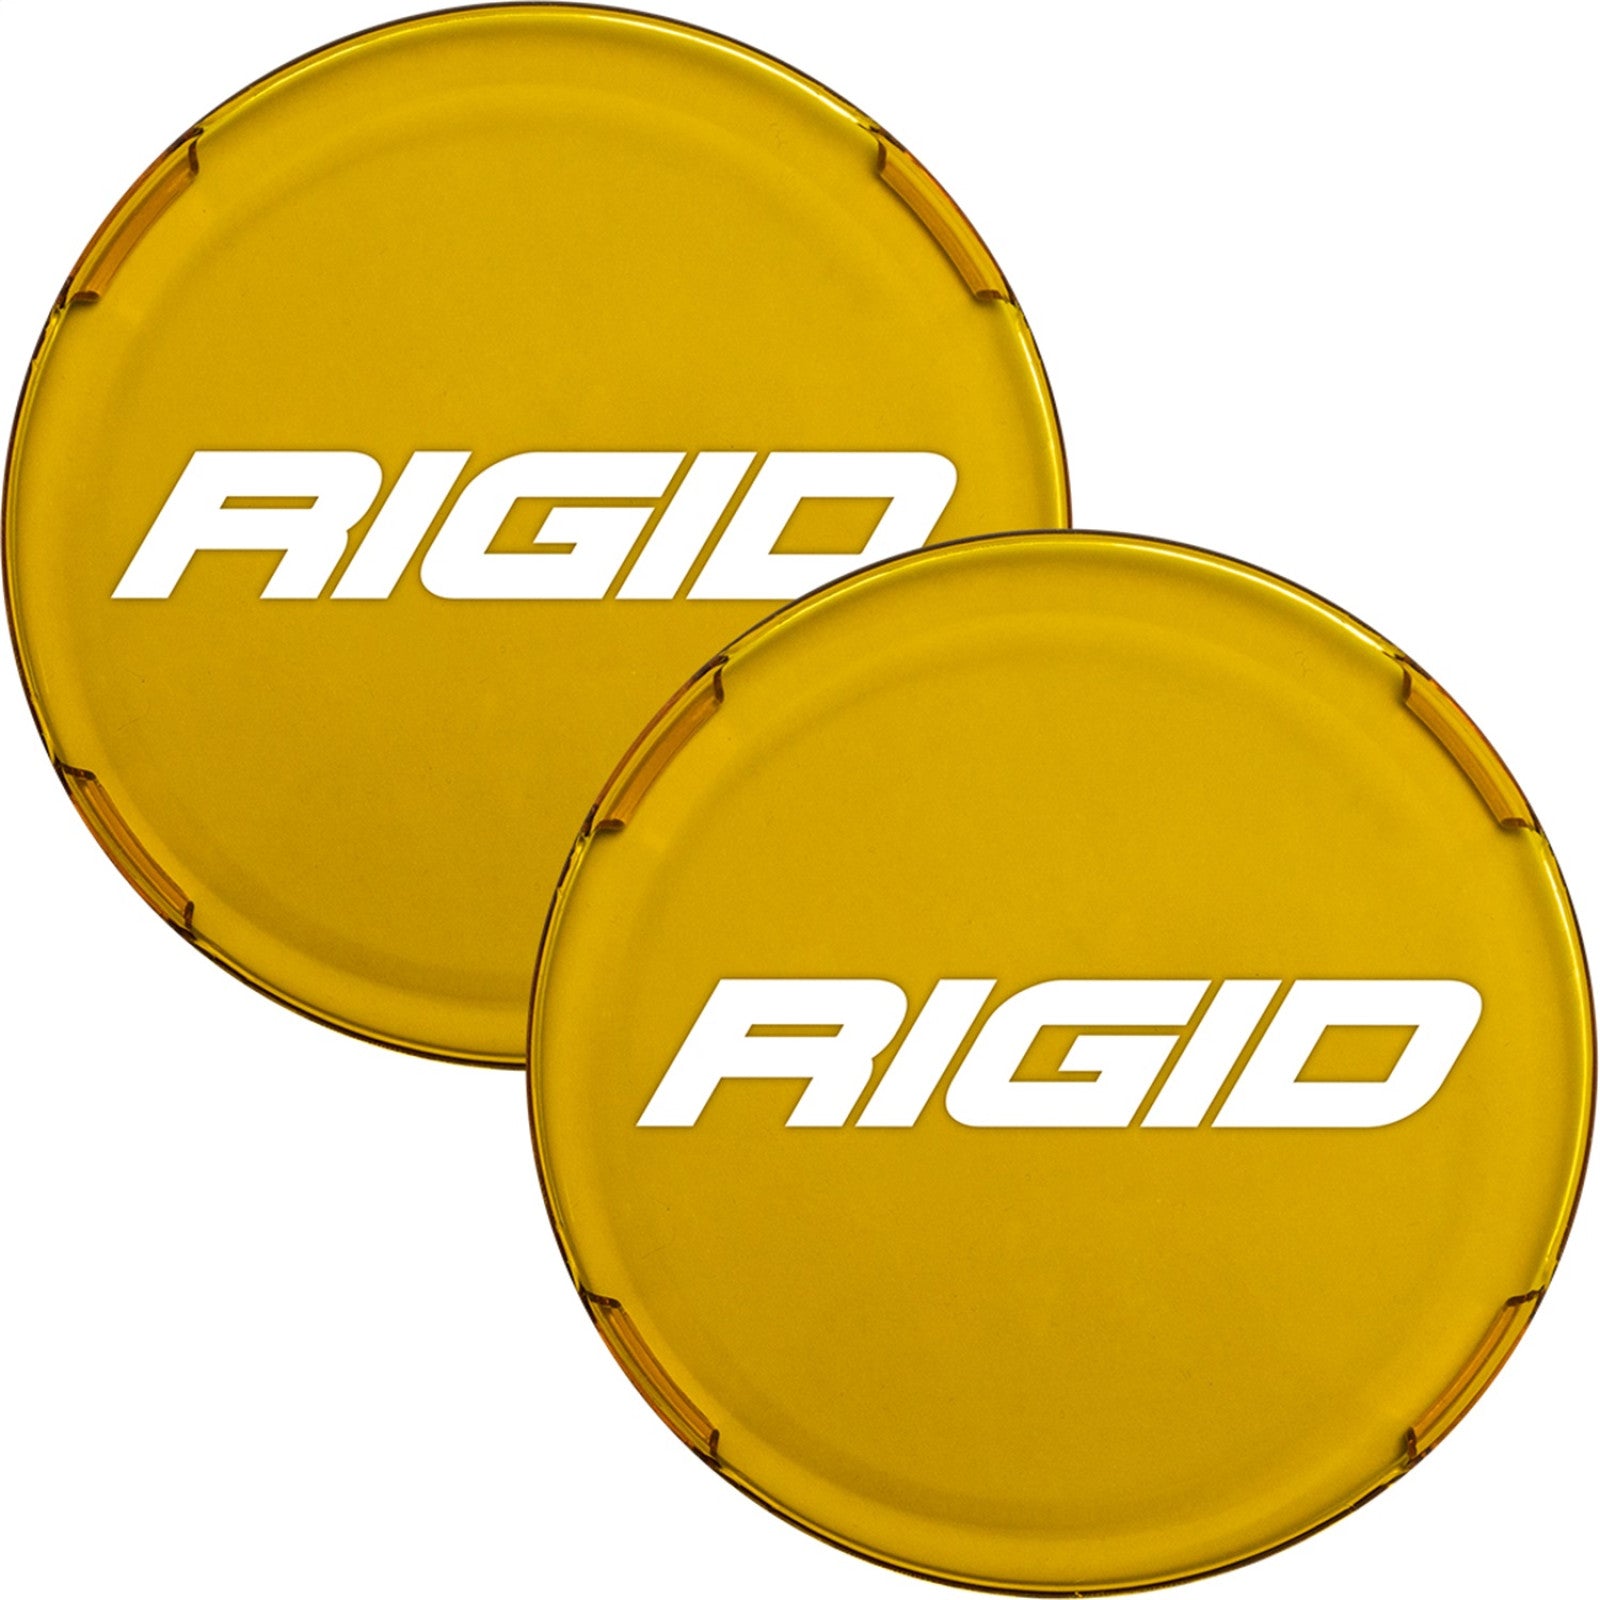 RIGID Industries 363662 RIGID Light Cover For 360-Series 6 Inch LED Lights, Amber, Pair